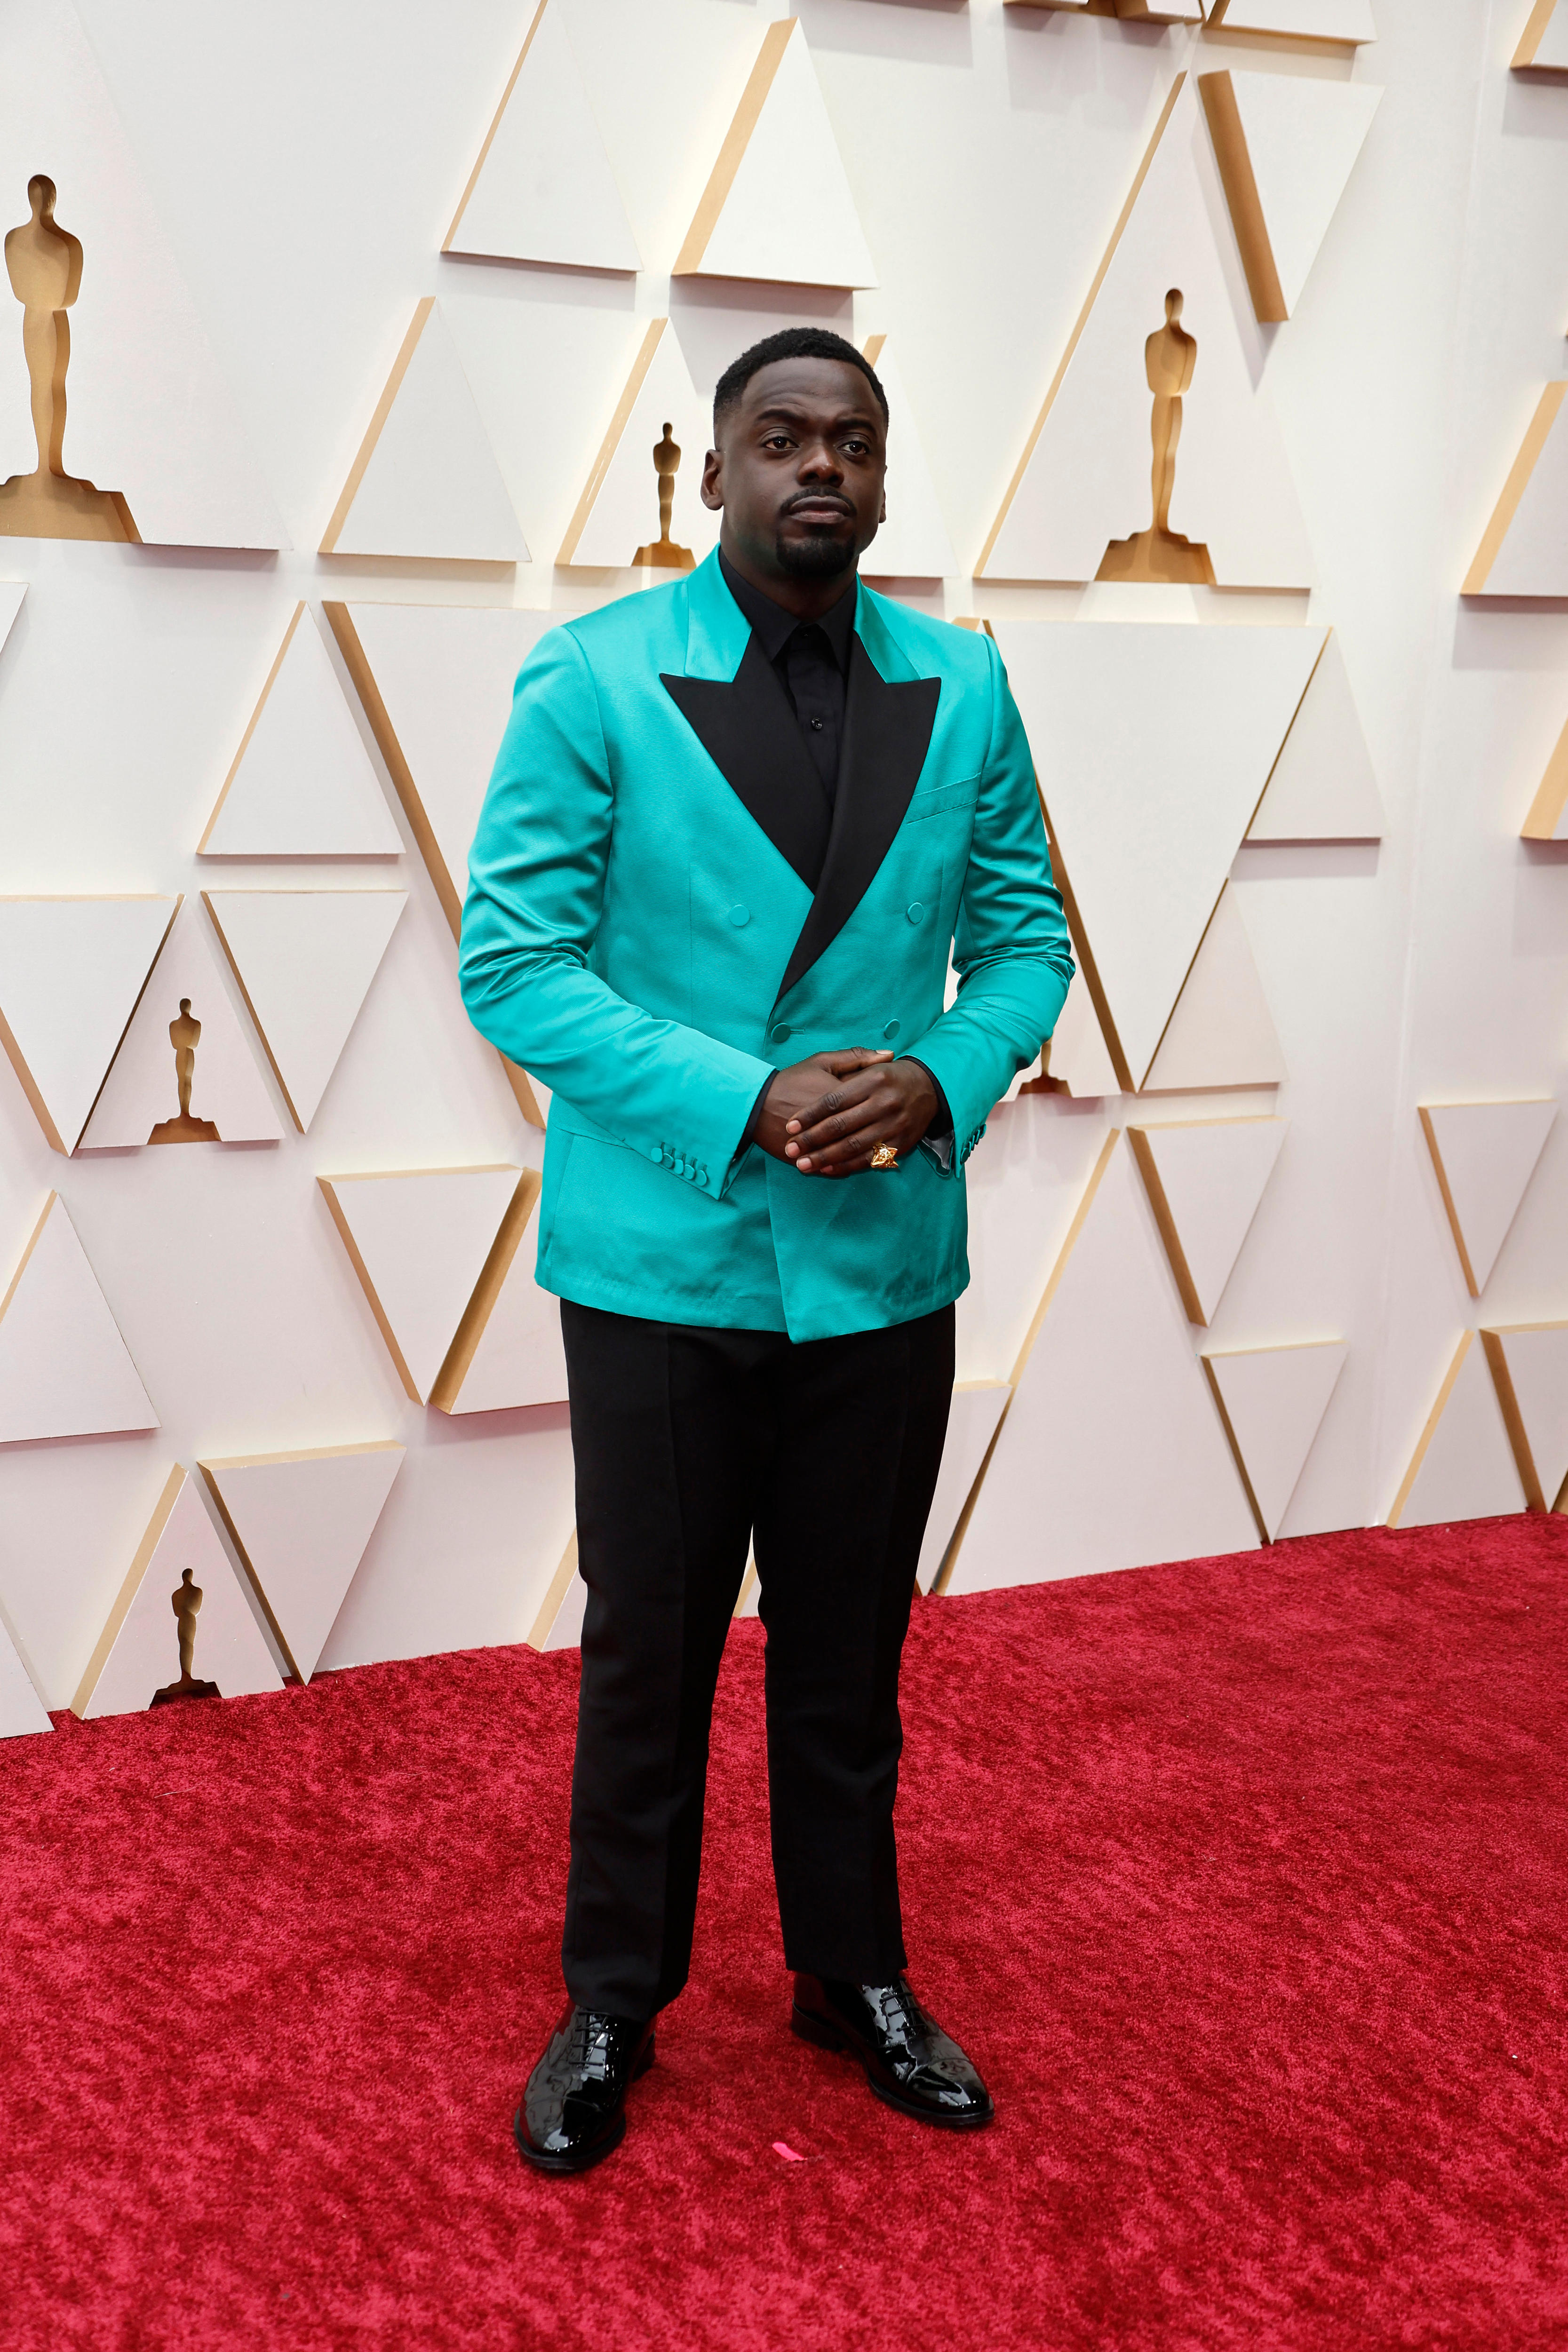 Actor Daniel Kaluuya wearing a turquoise suit jacket and black pants on the Oscars red carpet.